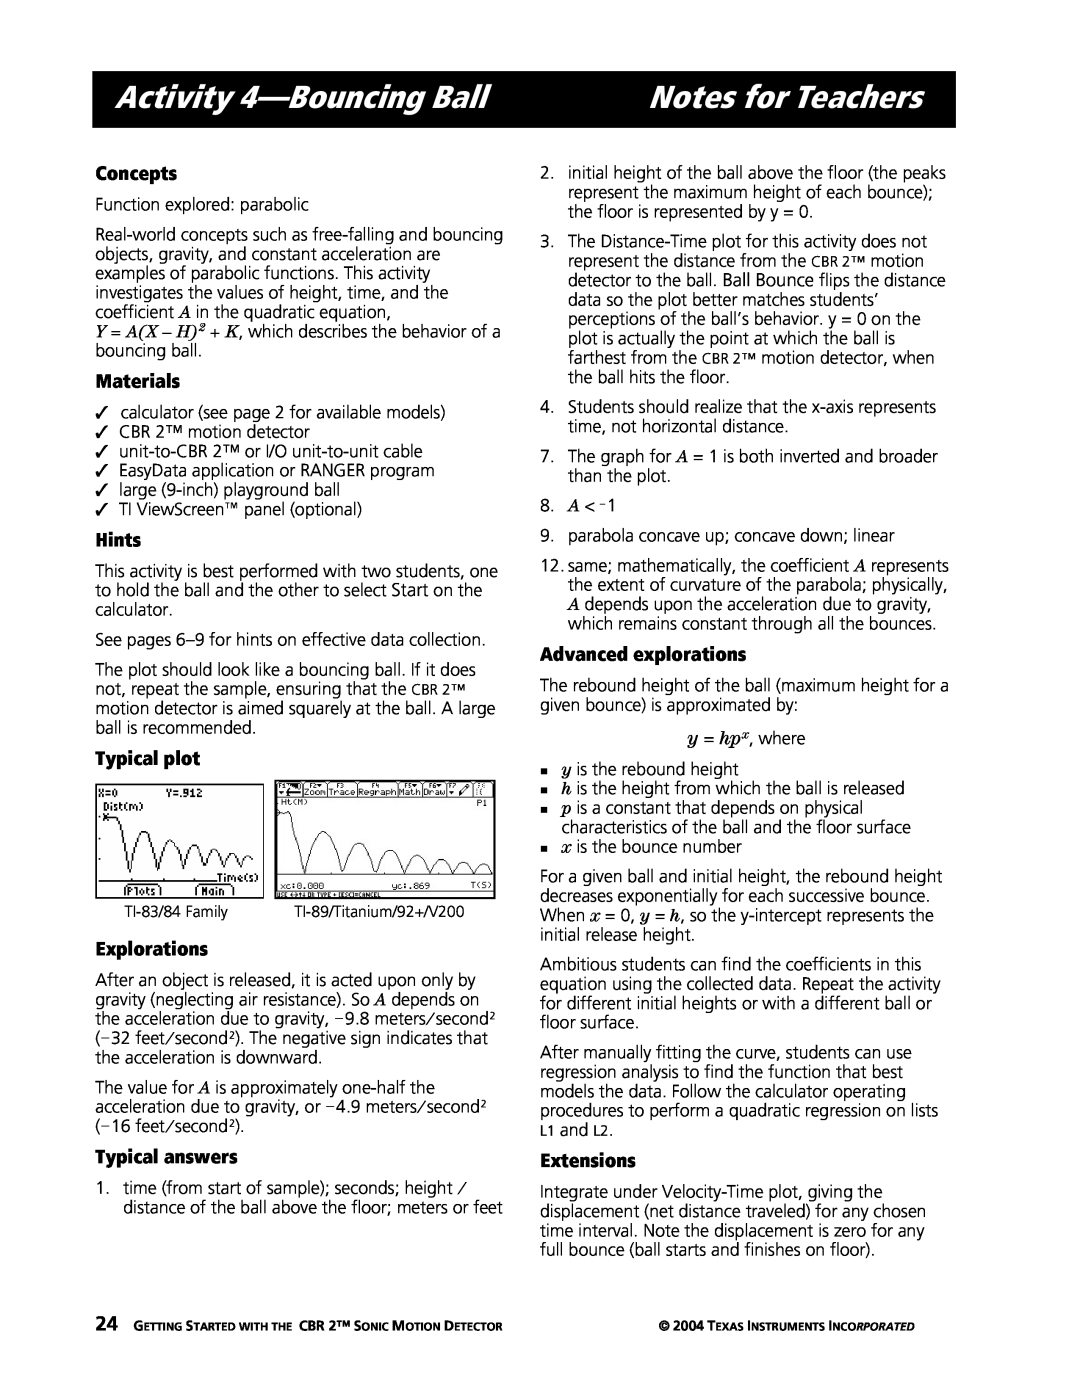 Texas Instruments CBR 2 Activity 4-BouncingBall, Notes for Teachers, Concepts, Materials, Hints, Typical plot, Extensions 